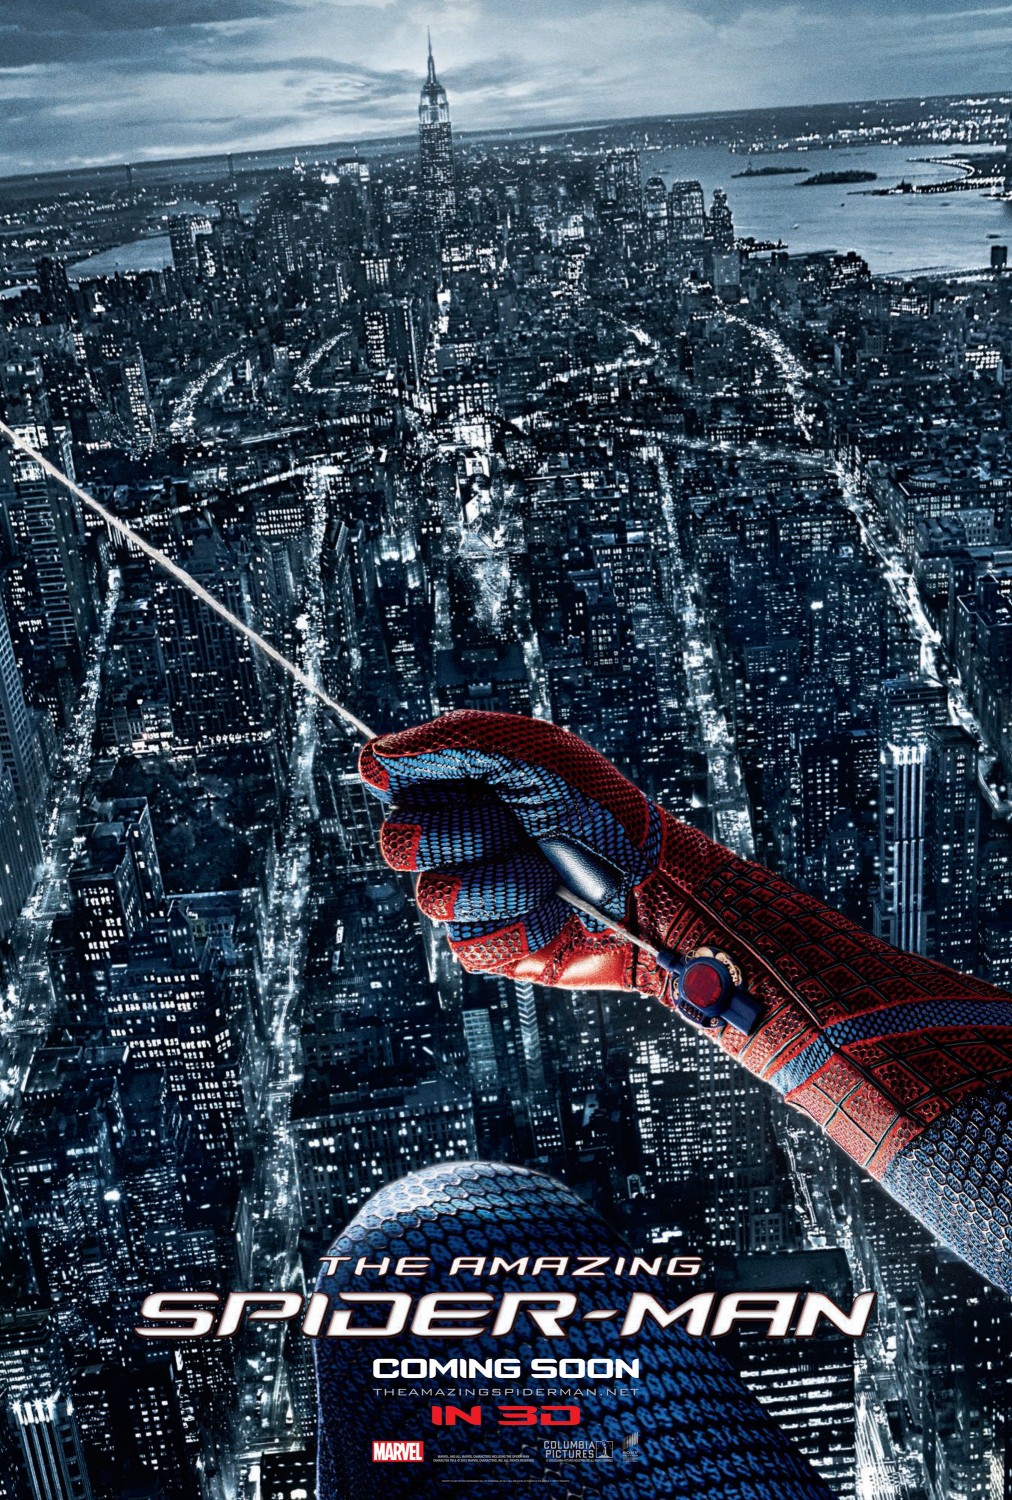 Extra Large Movie Poster Image for The Amazing Spider-Man (#10 of 14)